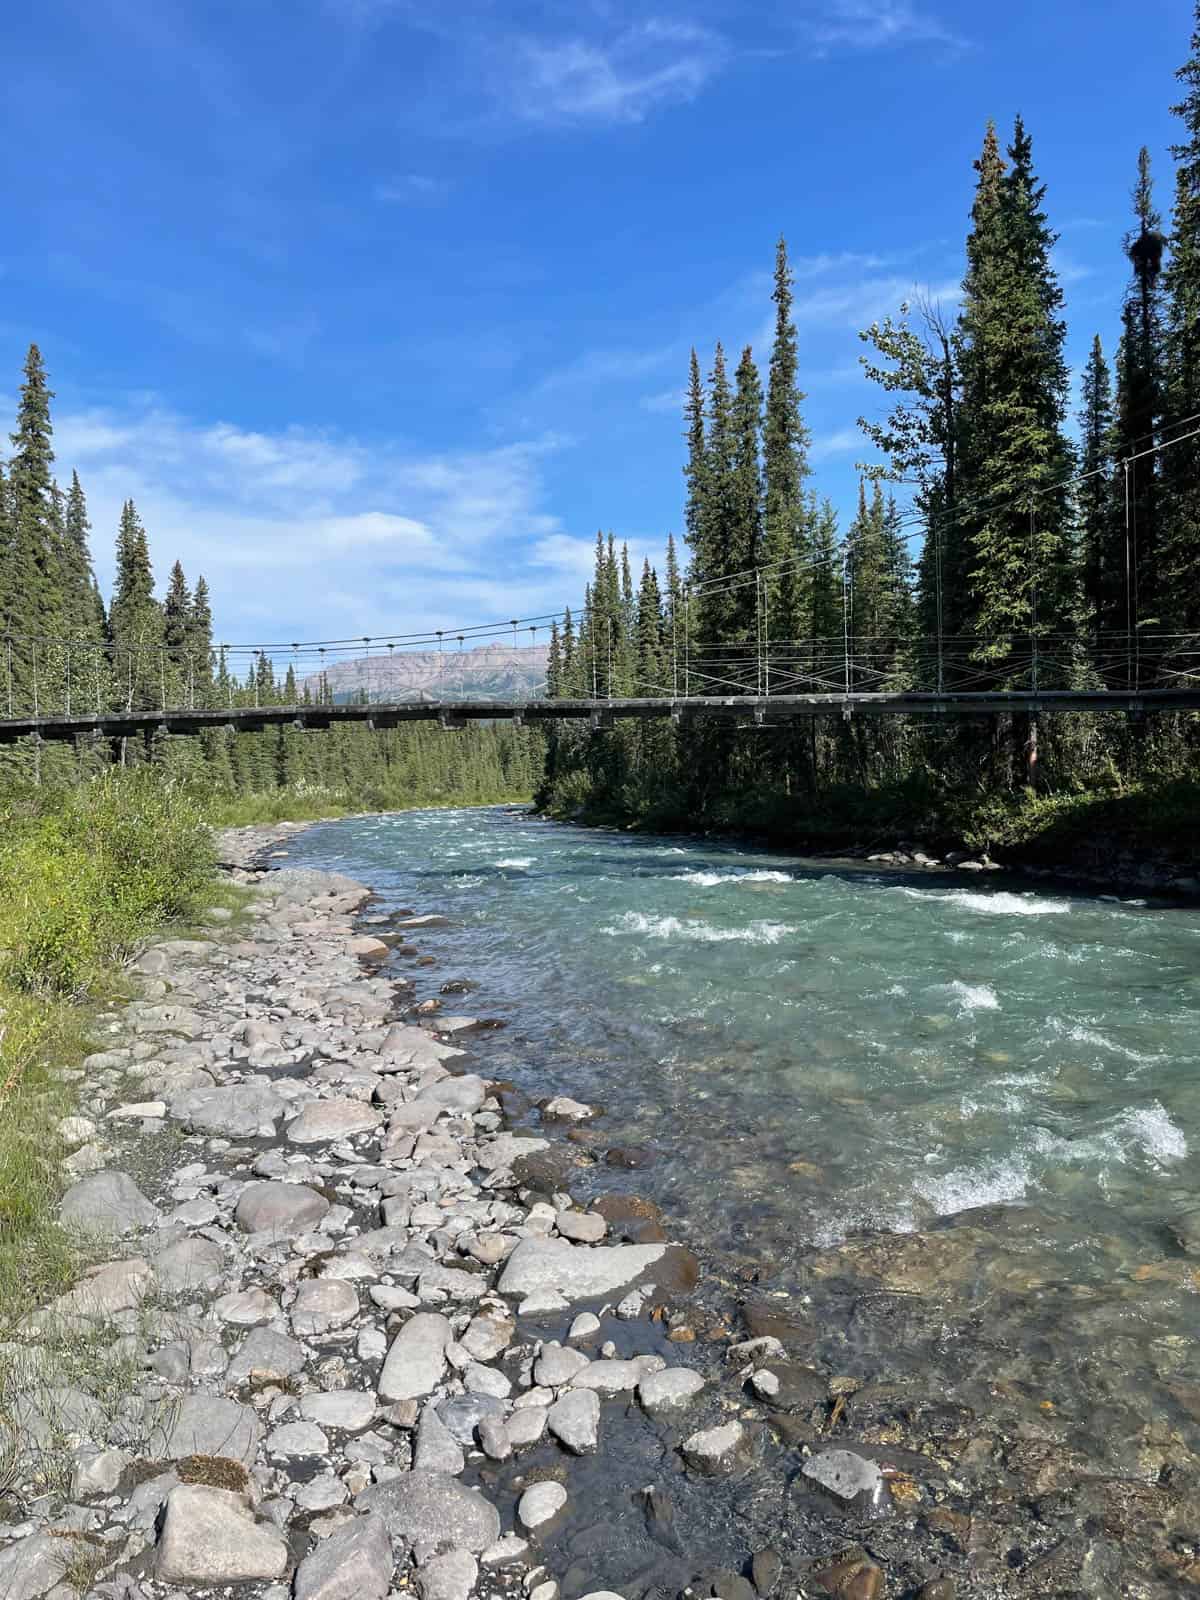 An image of a suspension bridge over a river in Denali National Park.